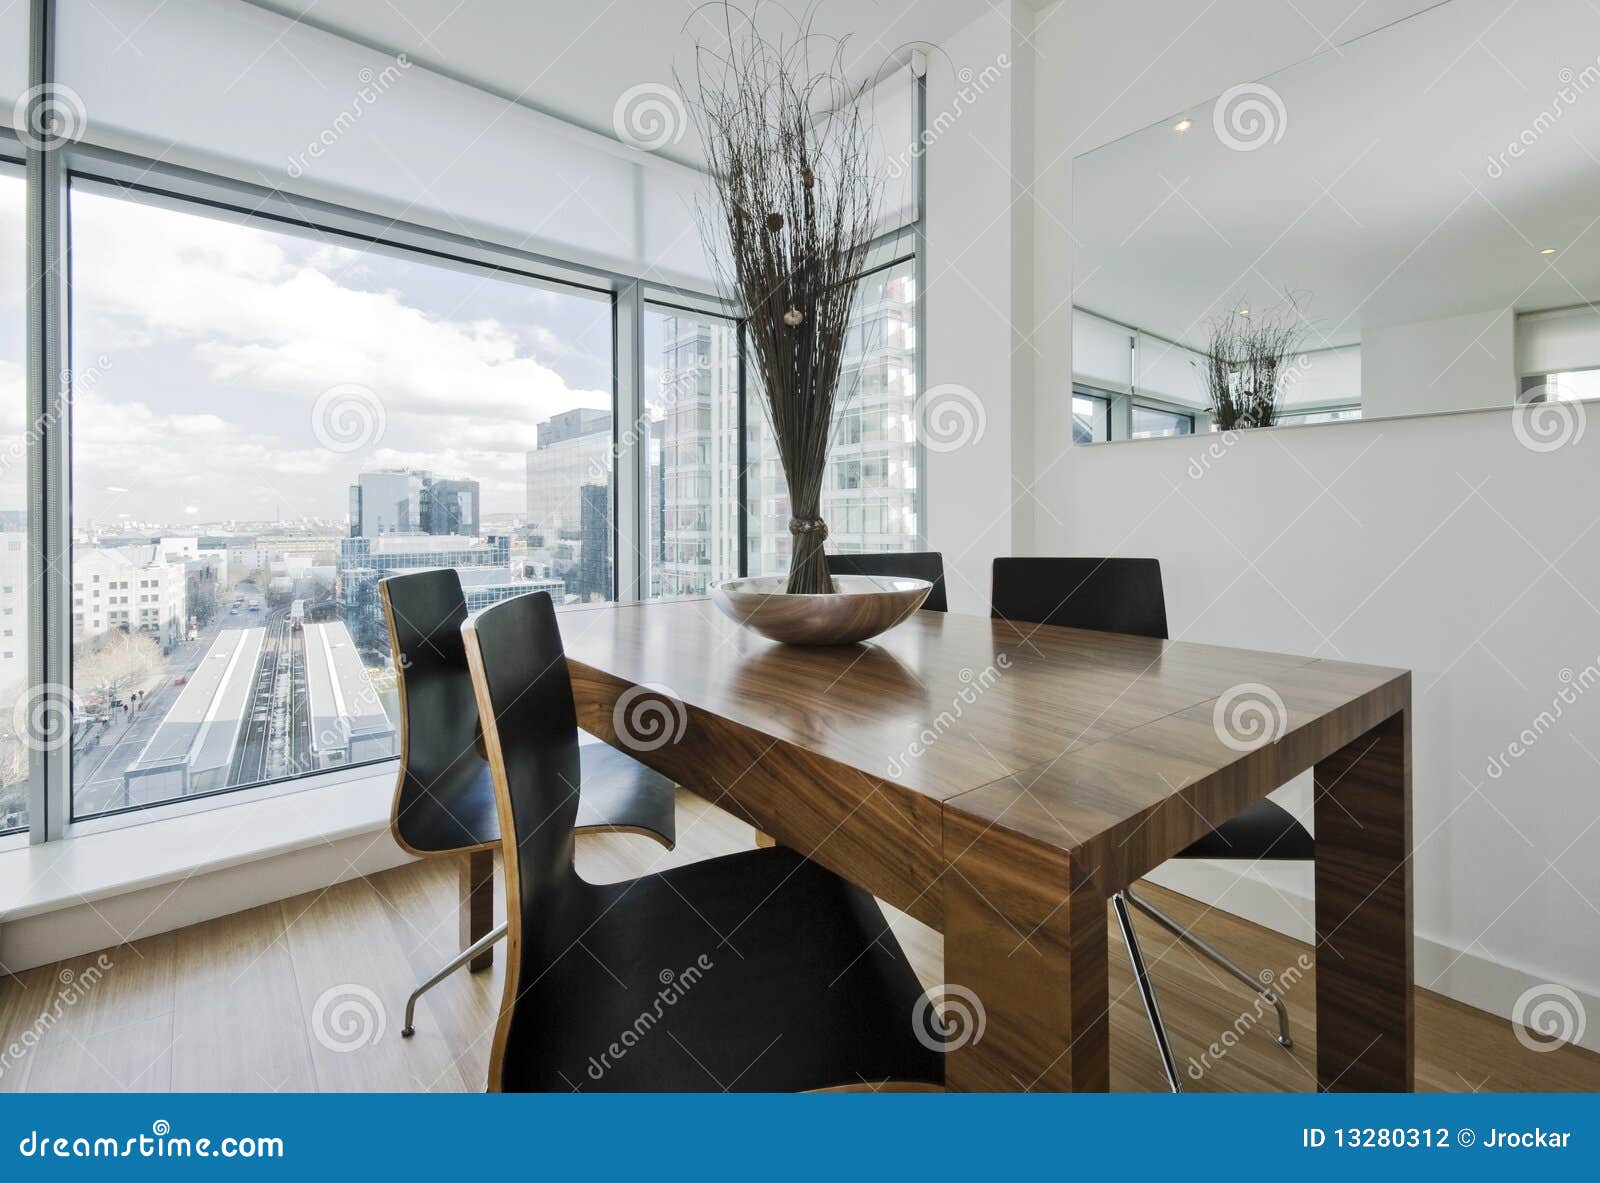 Dining Table Stock Photo Image Of Flat Laminate Floor 13280312